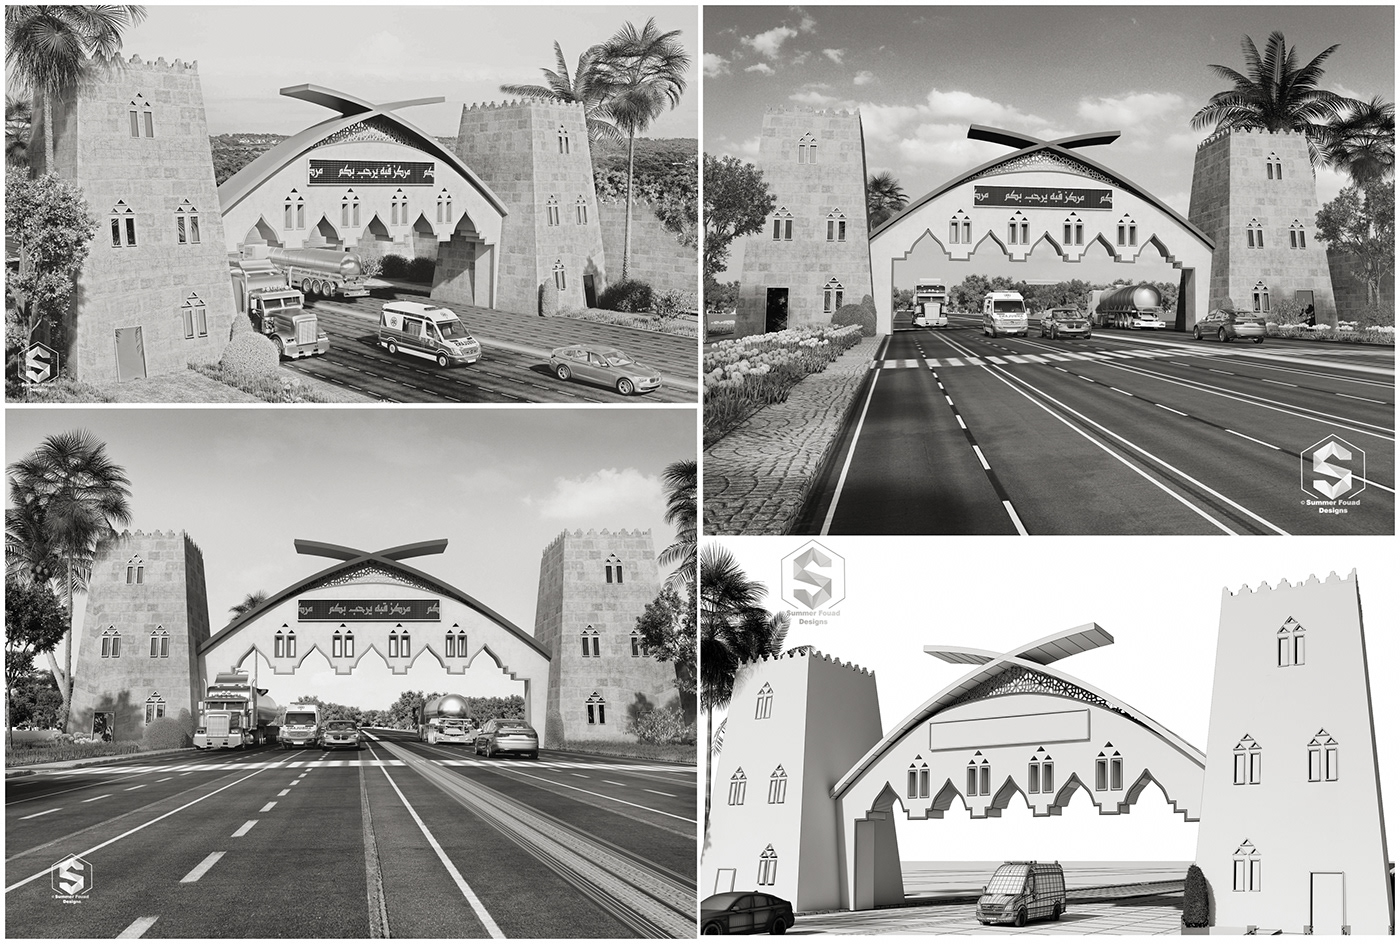 #gate  #entrance #securitygate #town #saudi #Islamic #archs #architecture #roads #highway